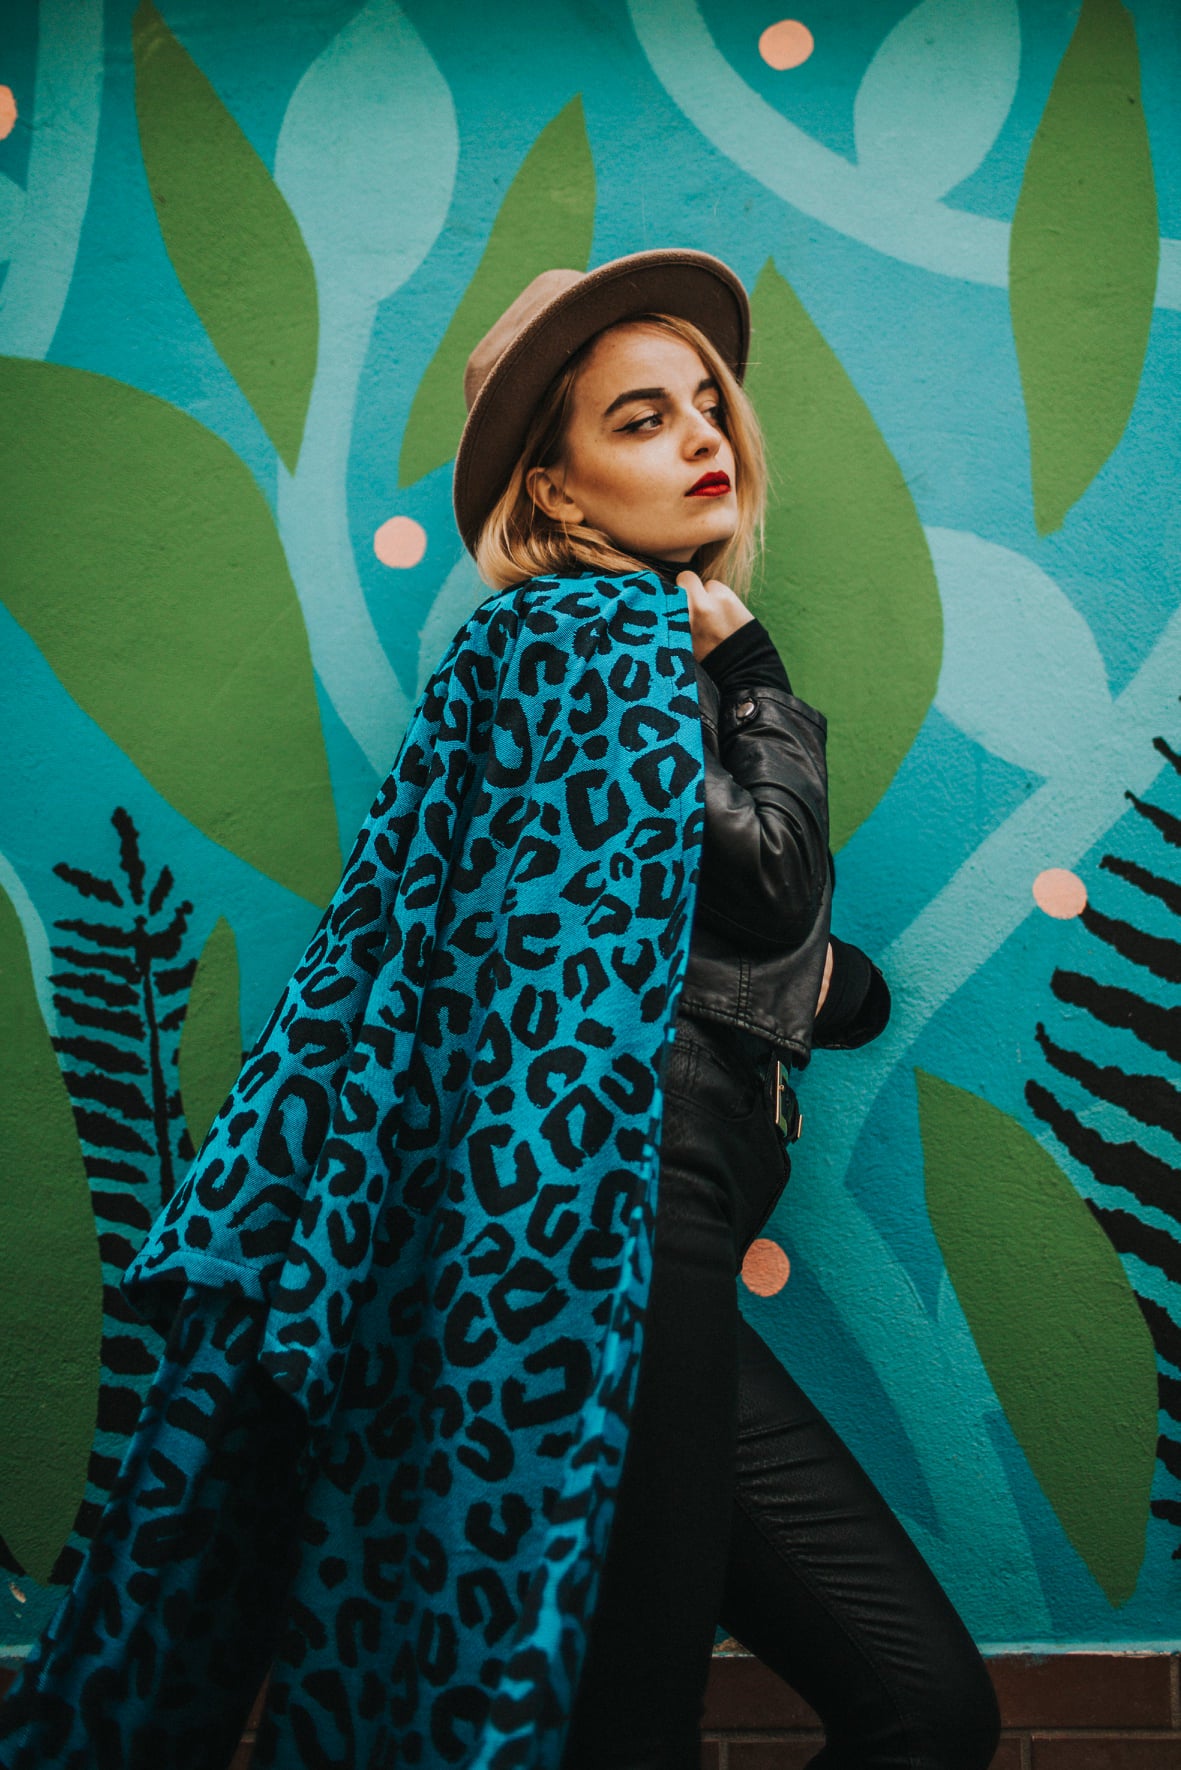 Welcome to the jungle – Deep turquoise